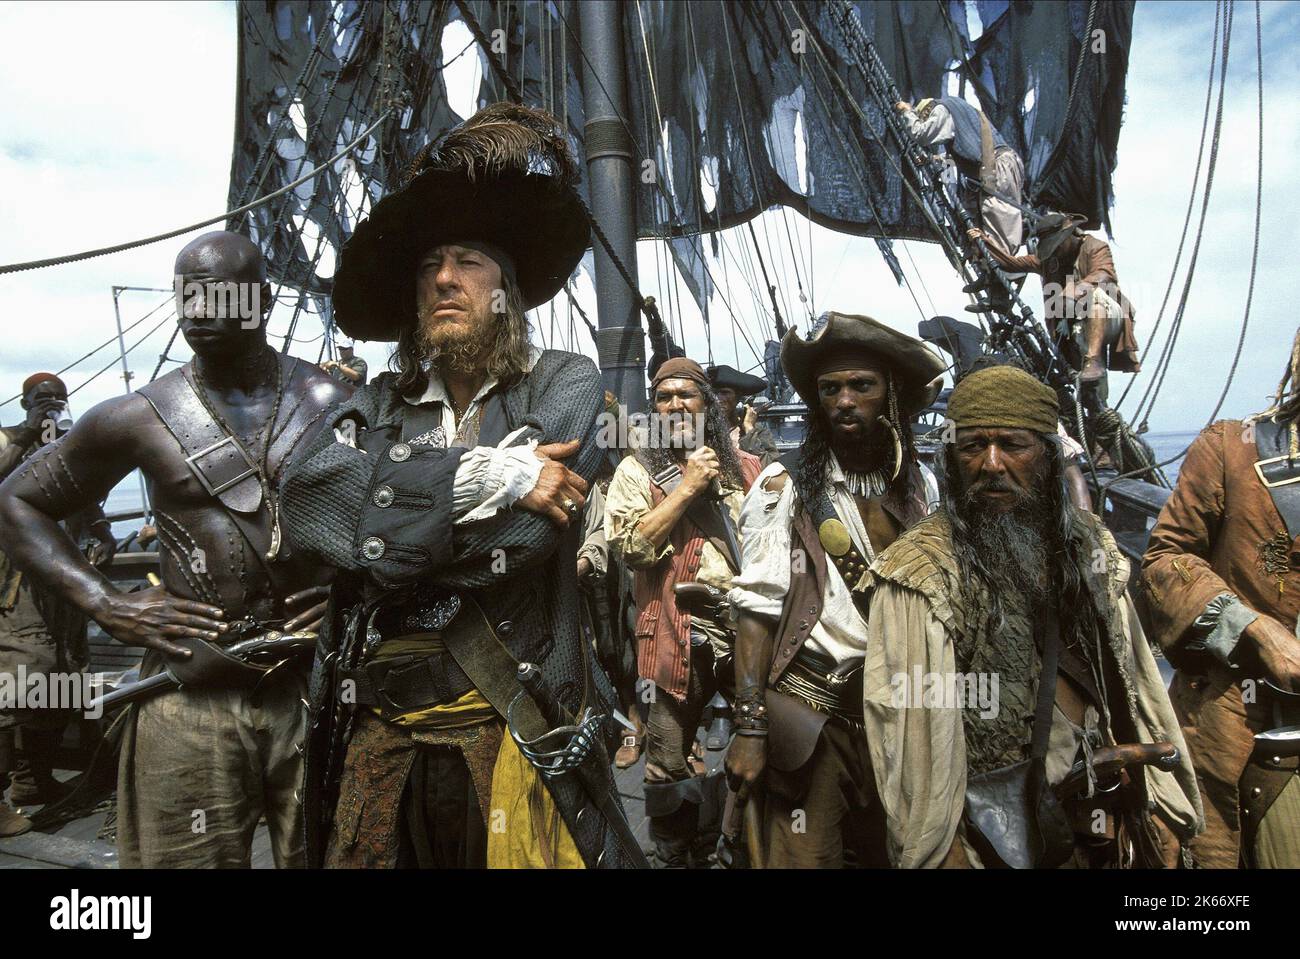 ISAAC C. SINGLETON JR., GEOFFREY RUSH, PIRATES OF THE CARIBBEAN: THE CURSE OF THE BLACK PEARL, 2003 Stock Photo